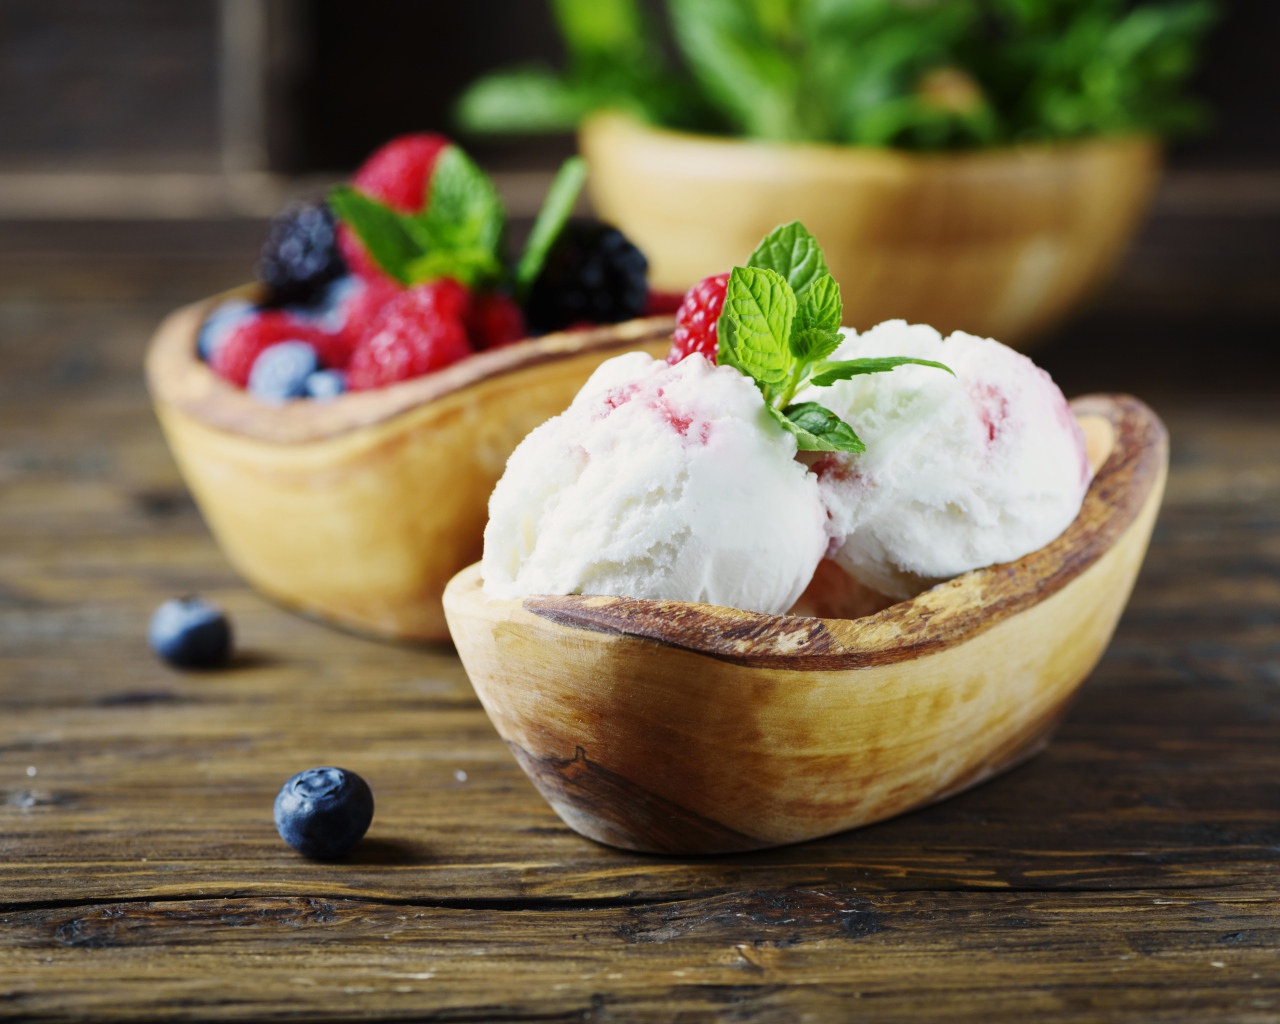 Ice cream balls with berries in a wooden bowl